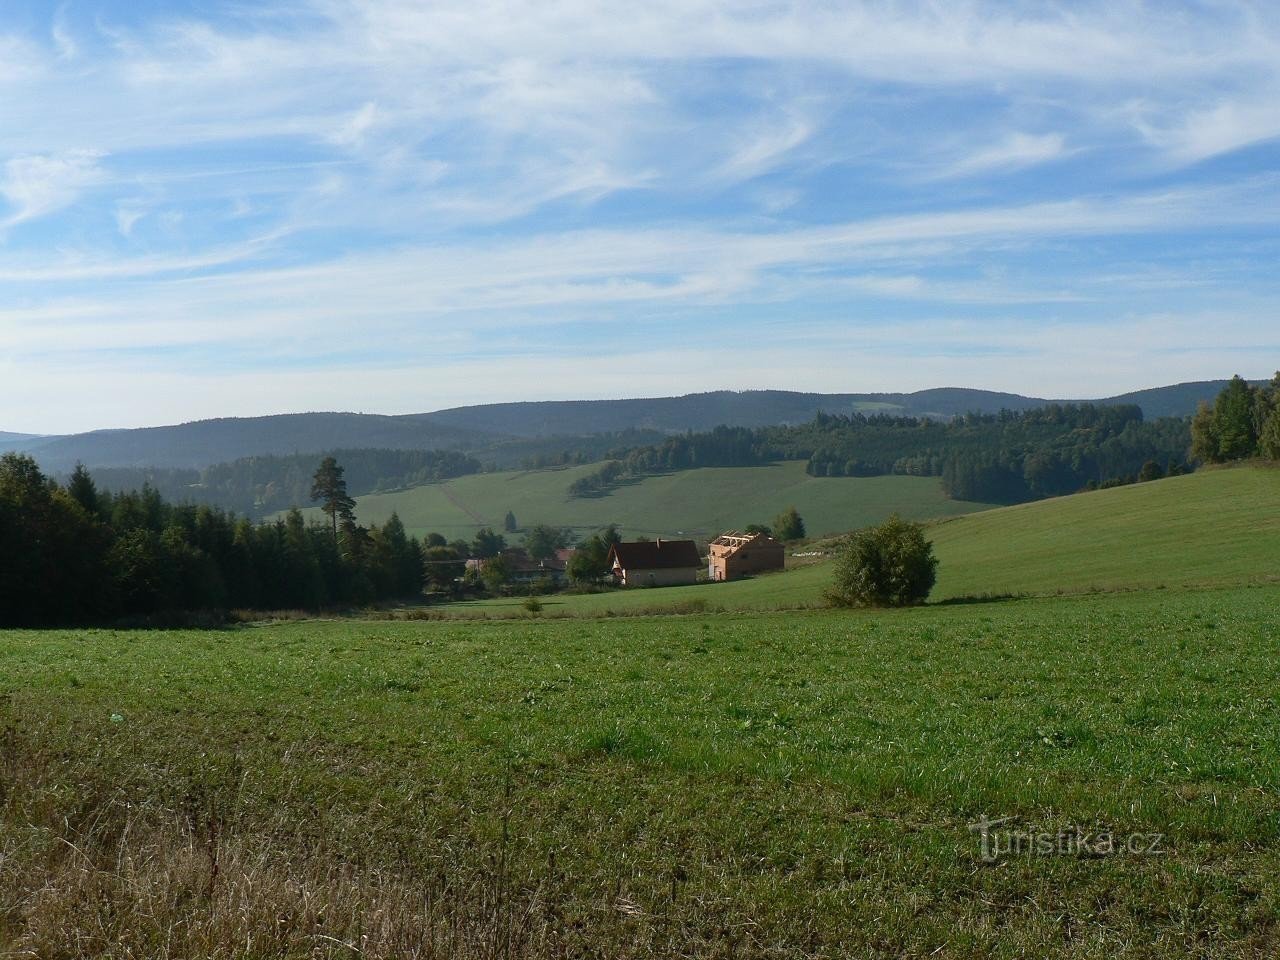 Libětice from the north, Šumava in the background